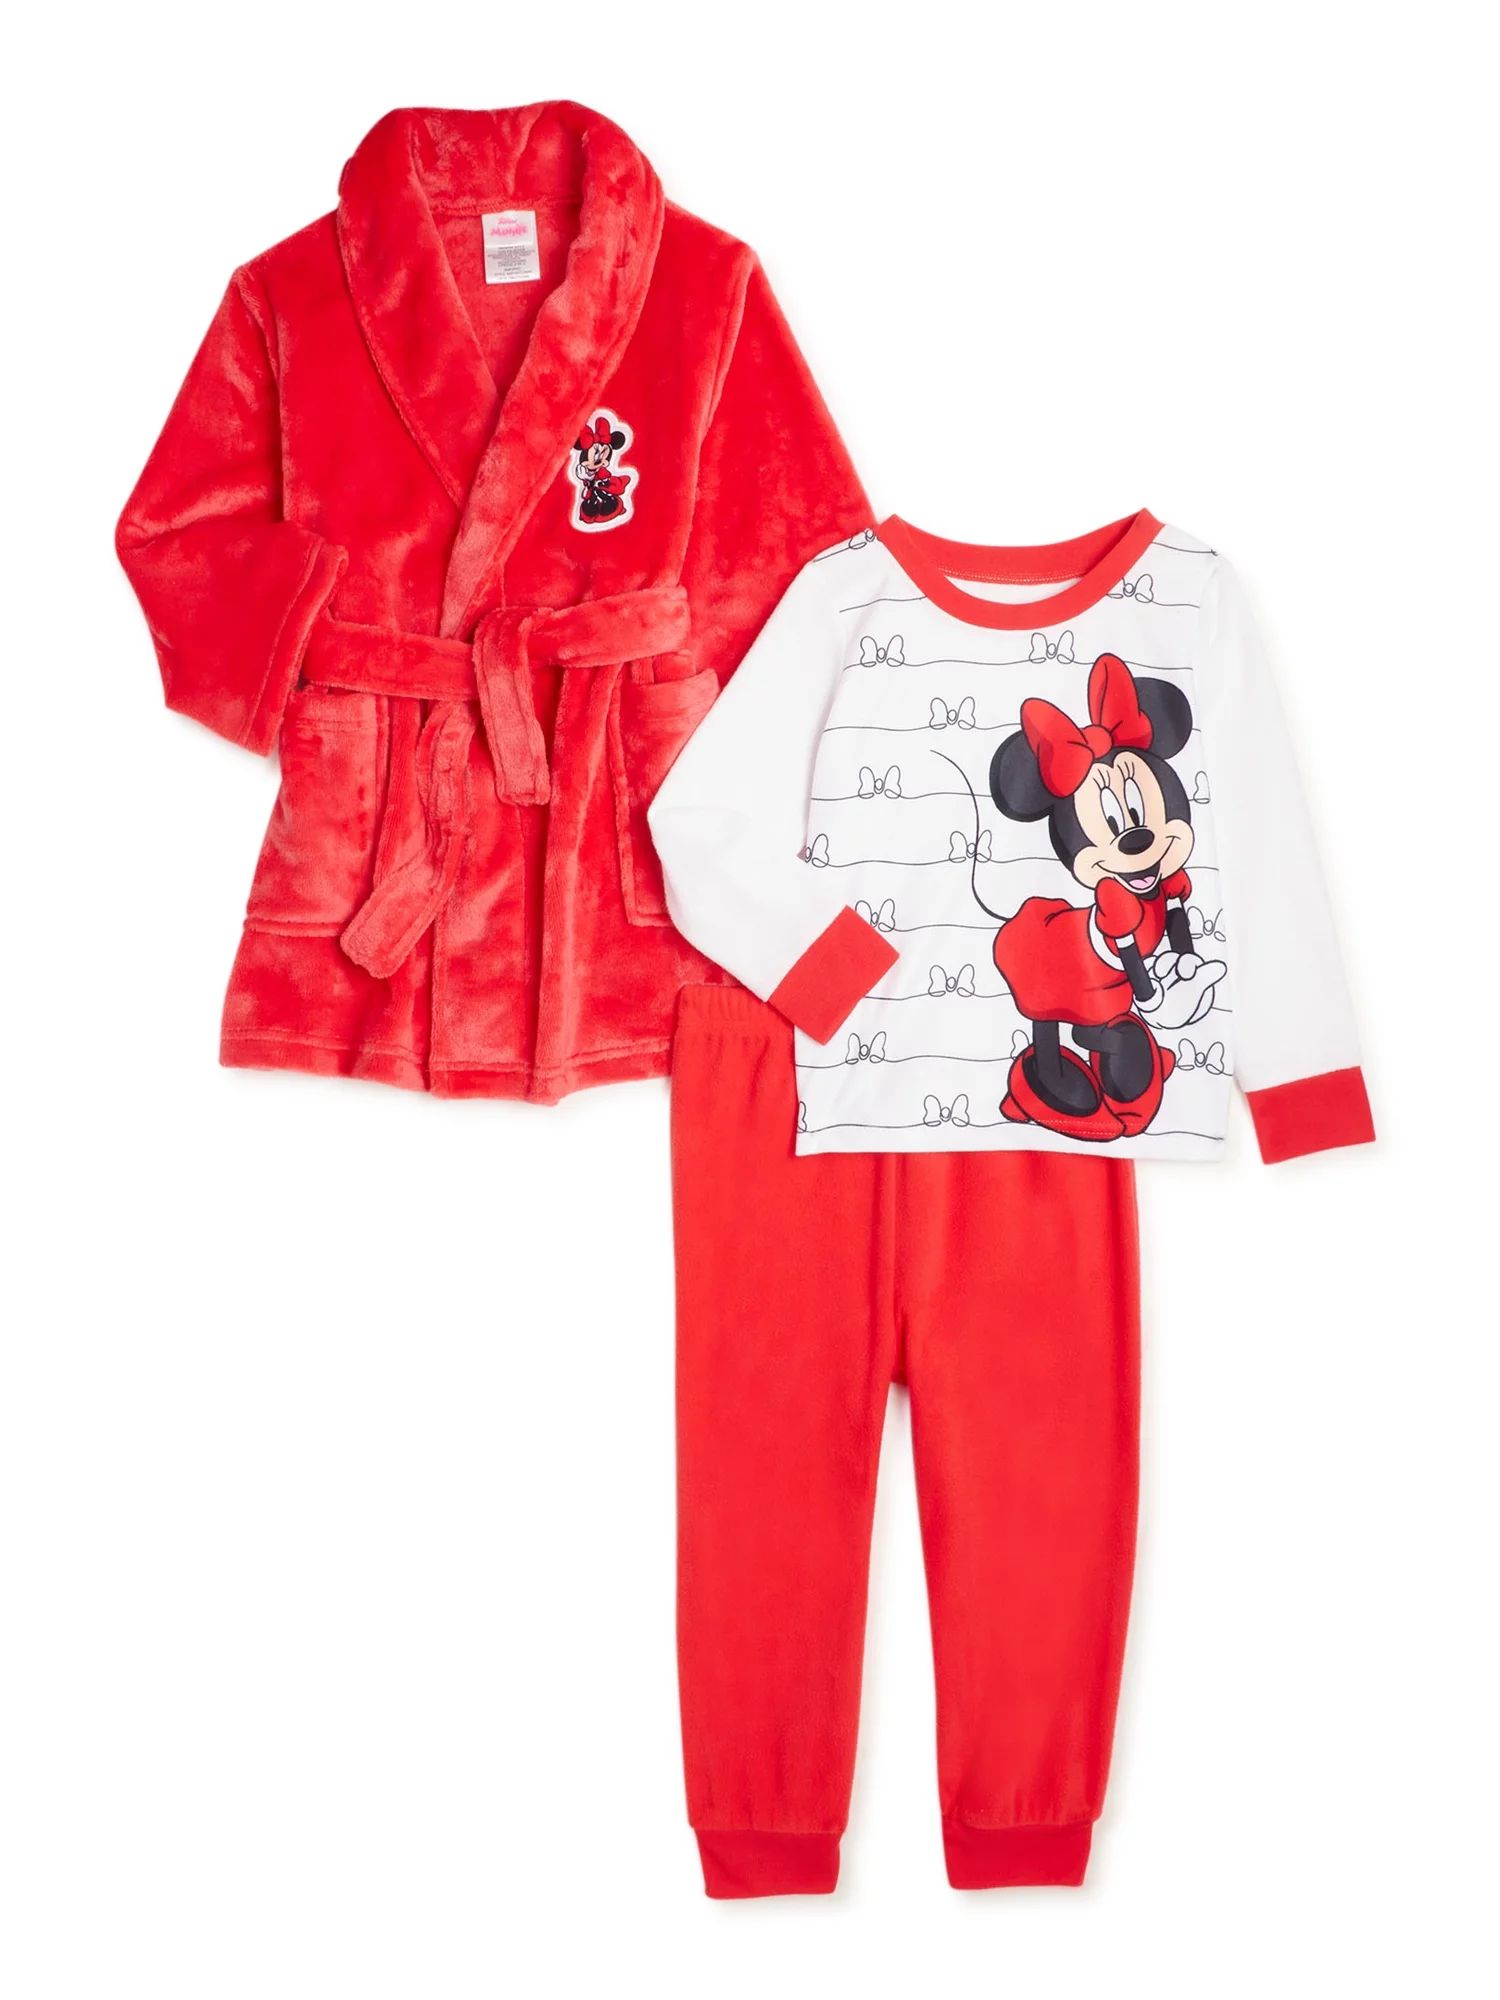 Disney Minnie Mouse Girls Long Sleeve Top, Pants and Robe, 3-Piece Pajama Set, Sizes 2T-5T | Walmart (US)